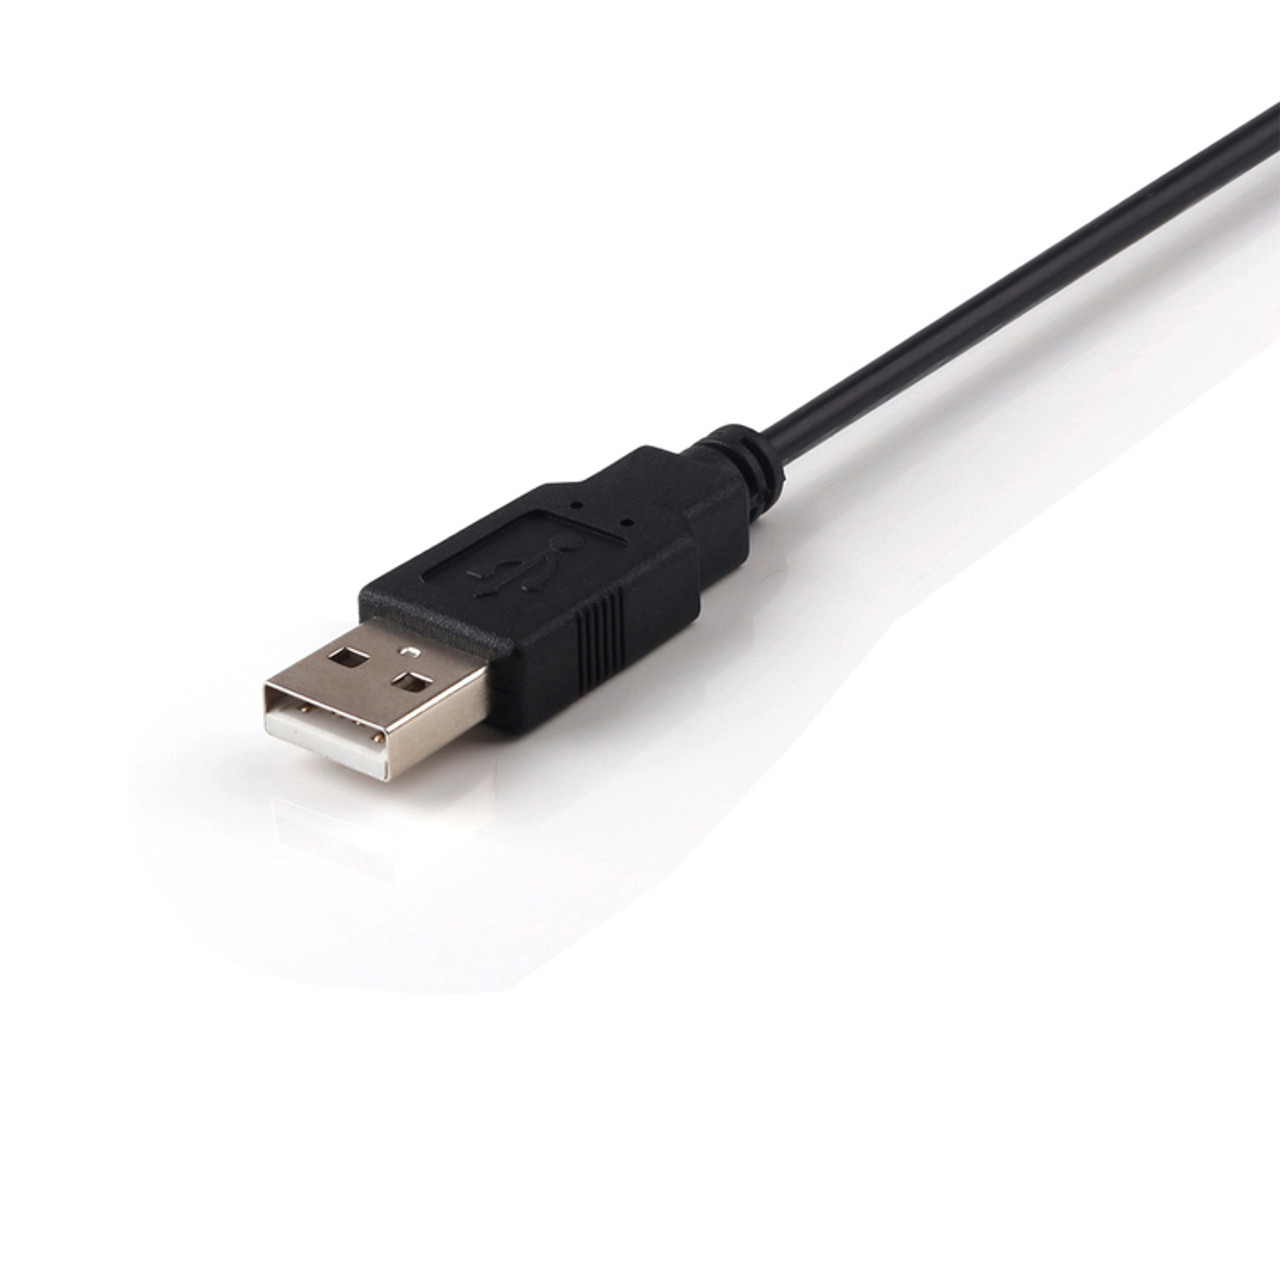 5M USB 2.0 AM/BM 28+24AWG Cable in Black